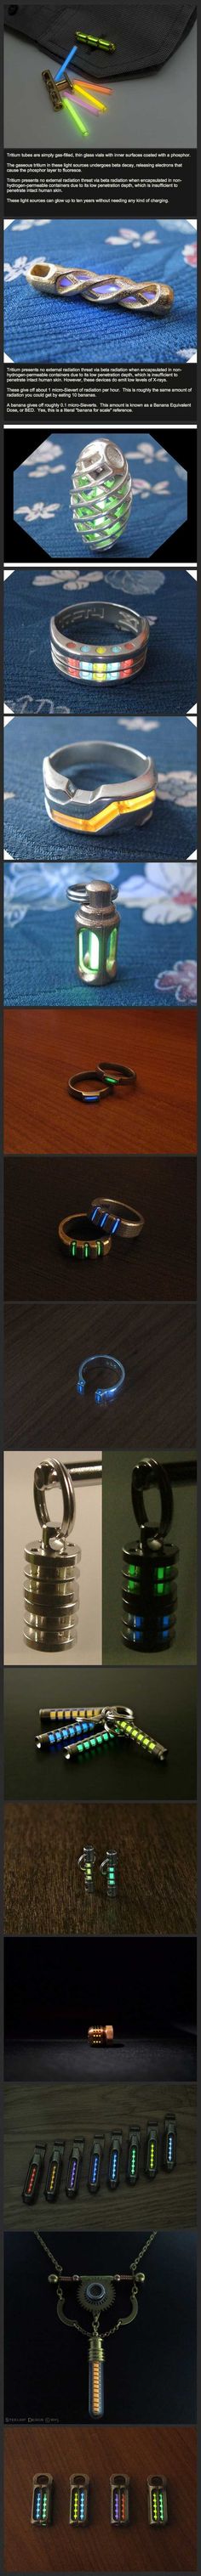 Tritium Jewelry. Cool as hell.